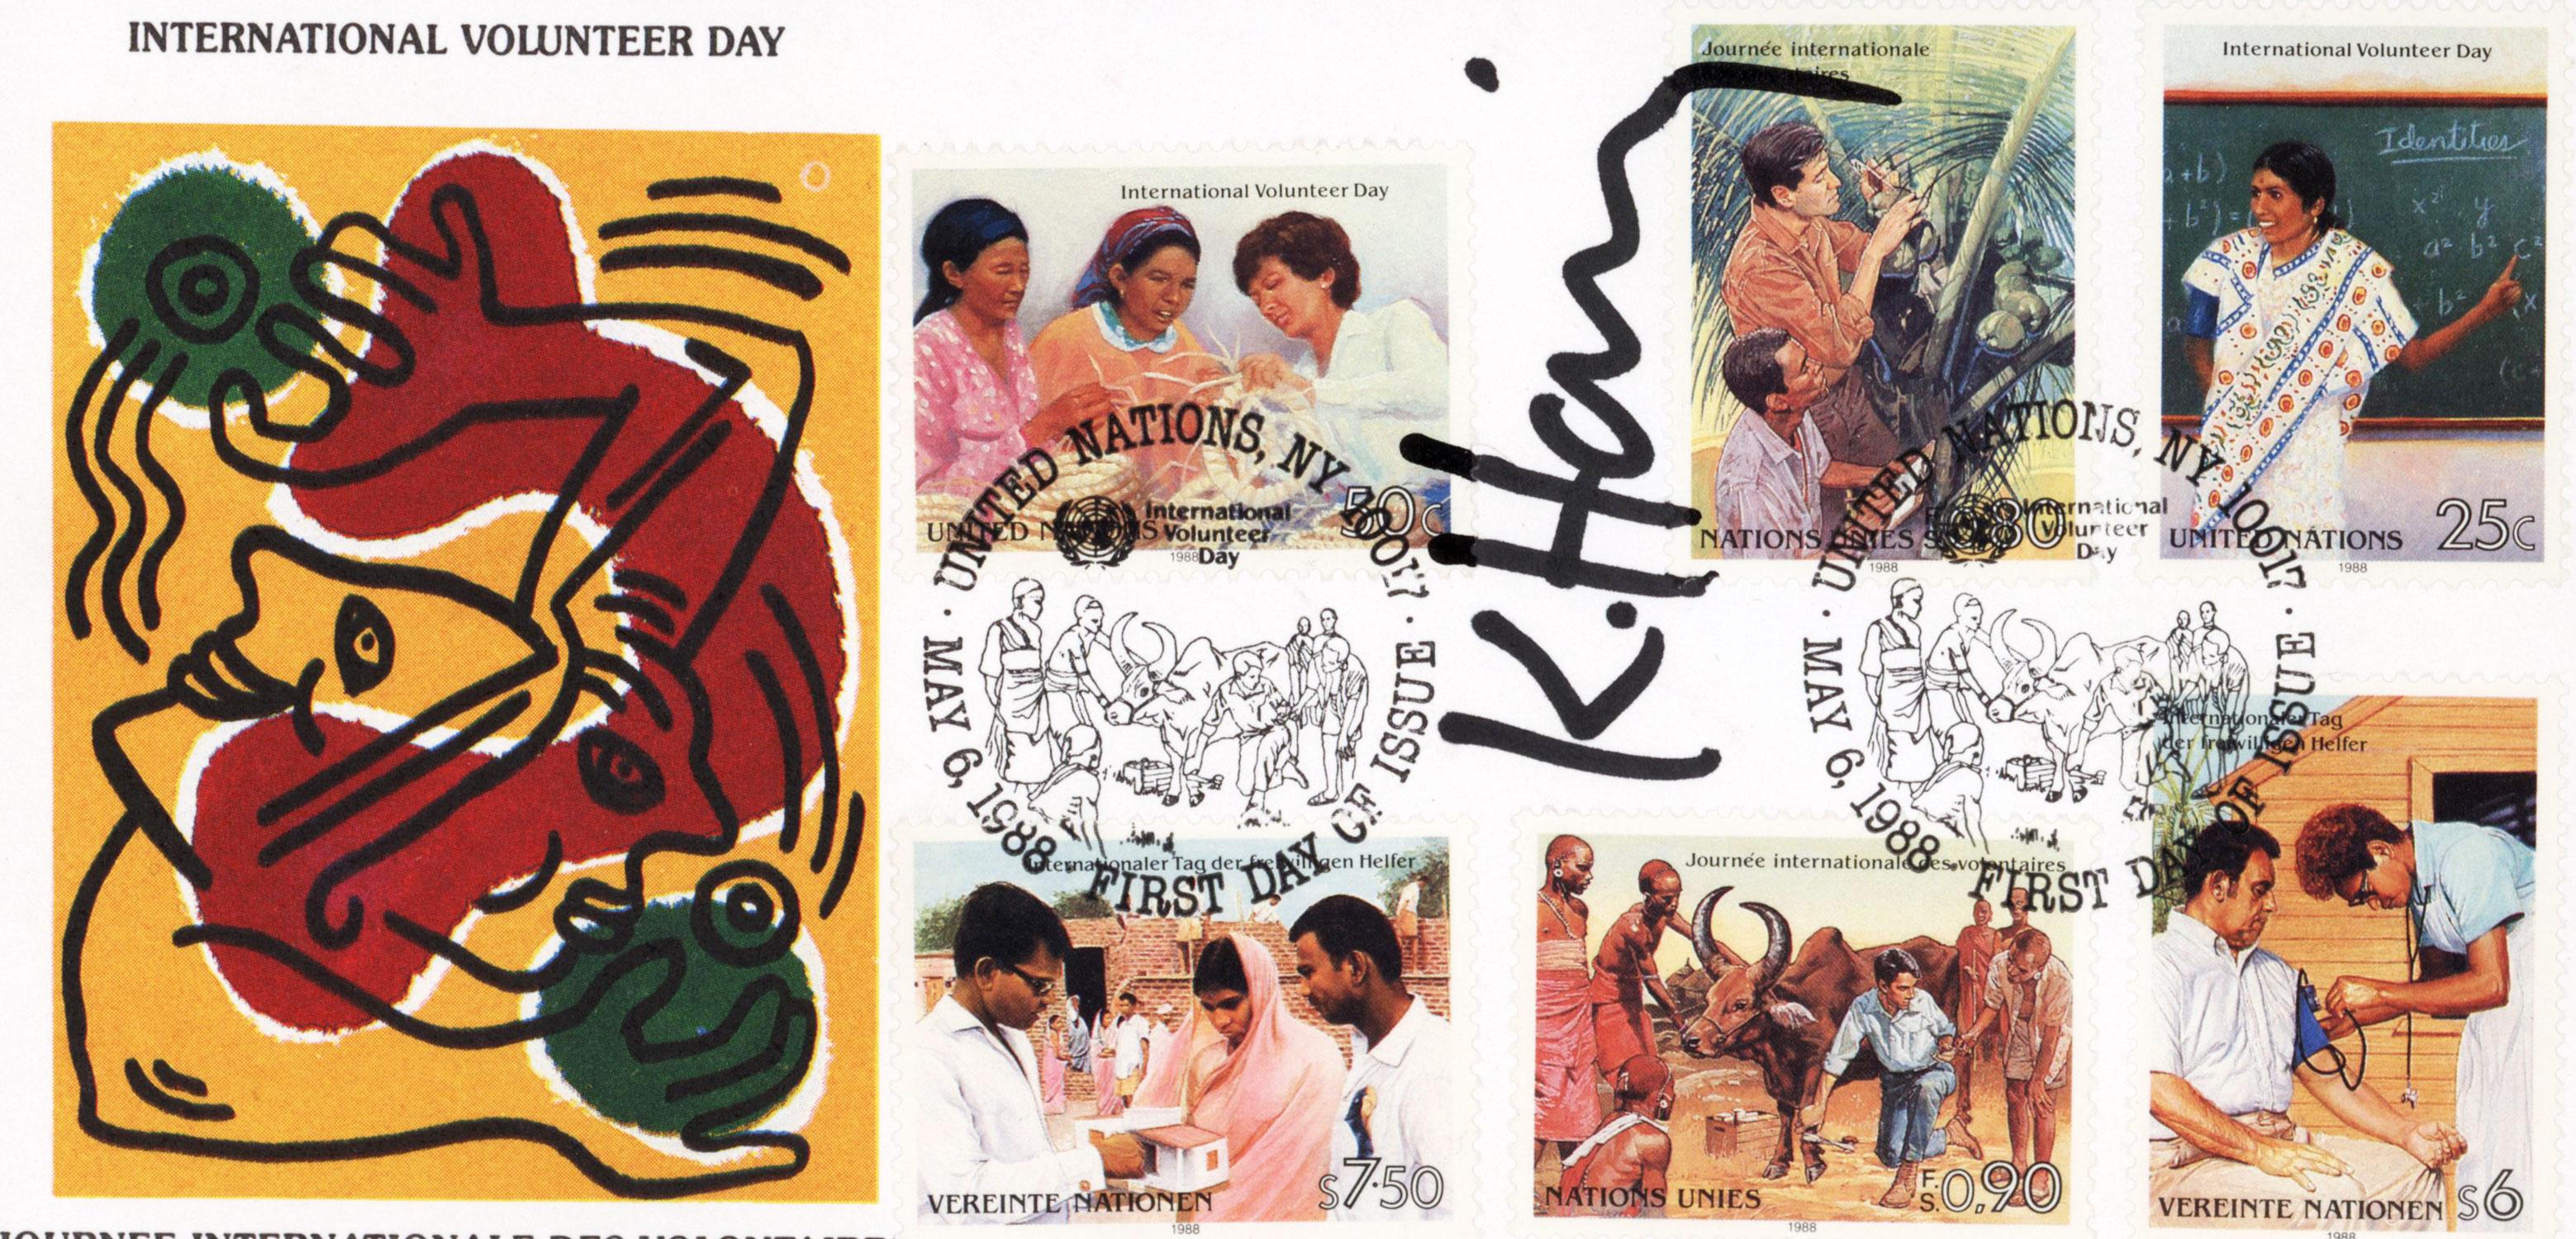 Keith Haring International Volunteer Day 1988:
A rare example featuring a well-preserved, bold black-marker signature by Keith Haring. 